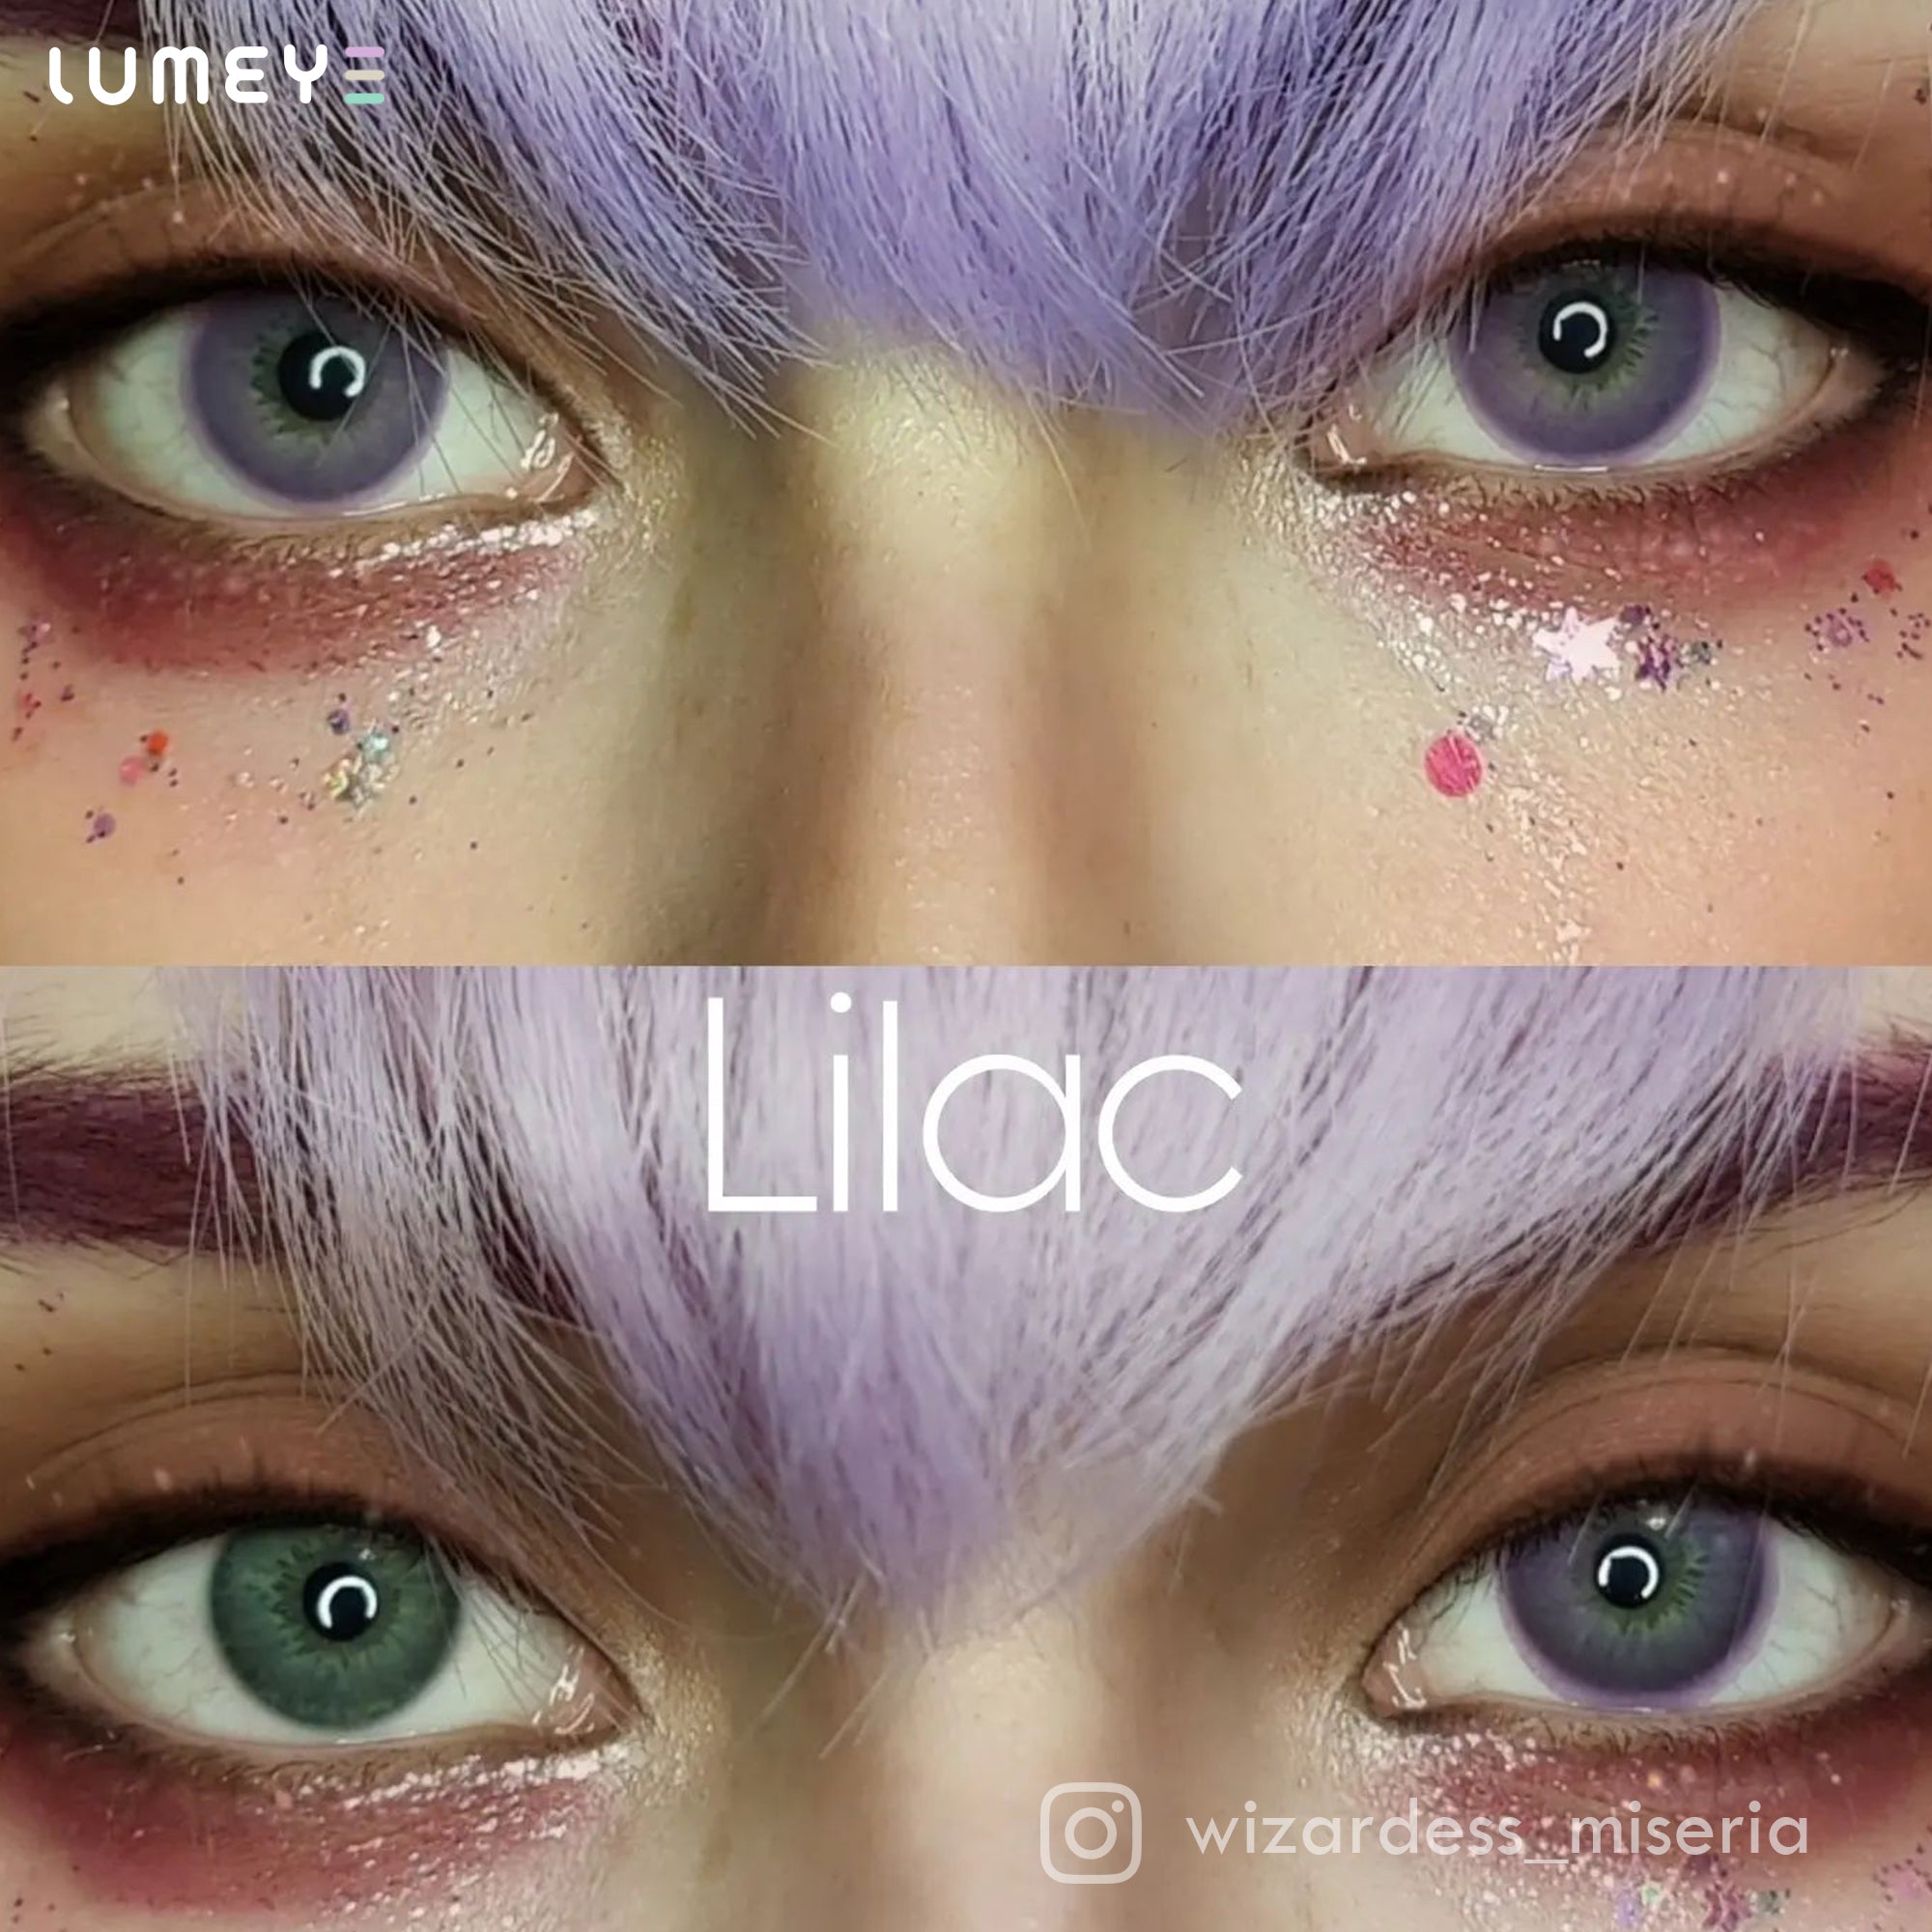 Best COLORED CONTACTS - LUMEYE Lilac Purple Colored Contact Lenses - LUMEYE